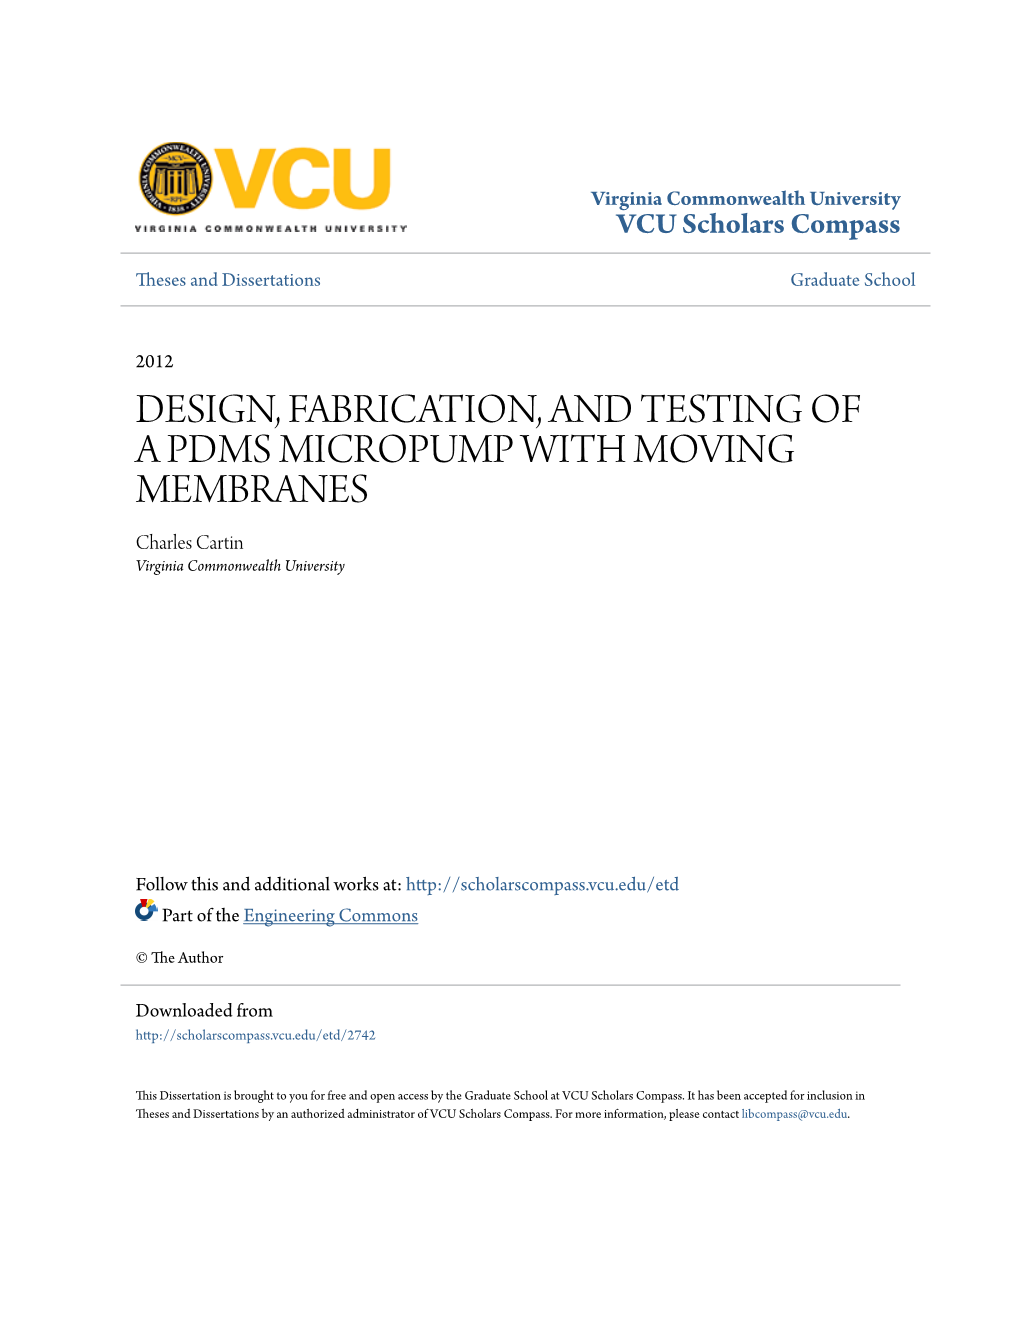 DESIGN, FABRICATION, and TESTING of a PDMS MICROPUMP with MOVING MEMBRANES Charles Cartin Virginia Commonwealth University